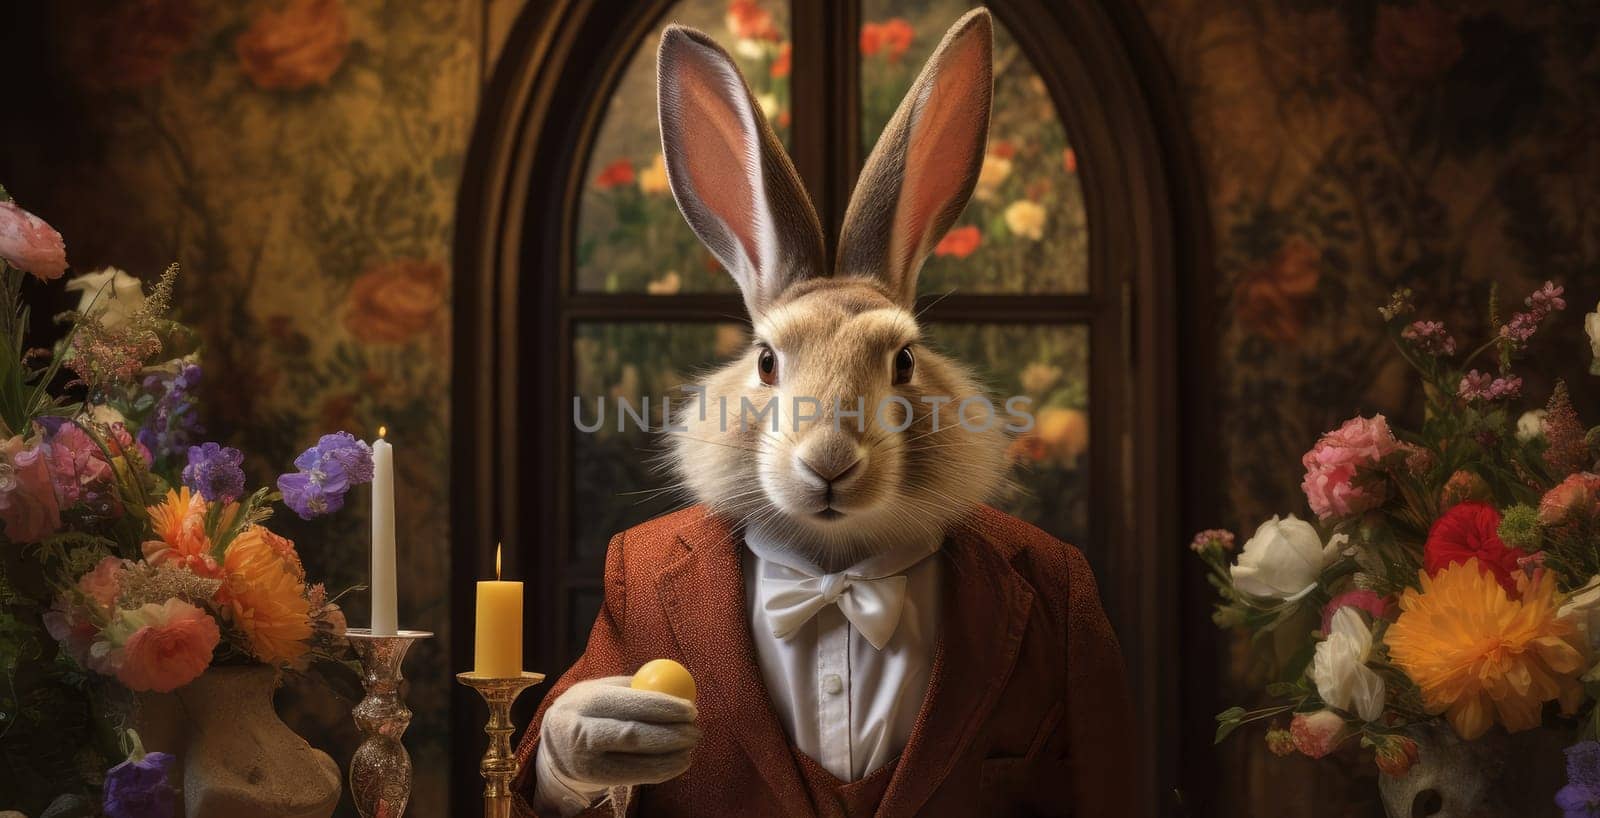 One large gentleman rabbit in a red jacket and a white shirt with a bow tie sits at a table in a festive room and holds a yellow Easter egg in his hand. Against the background of flowers in a vase.